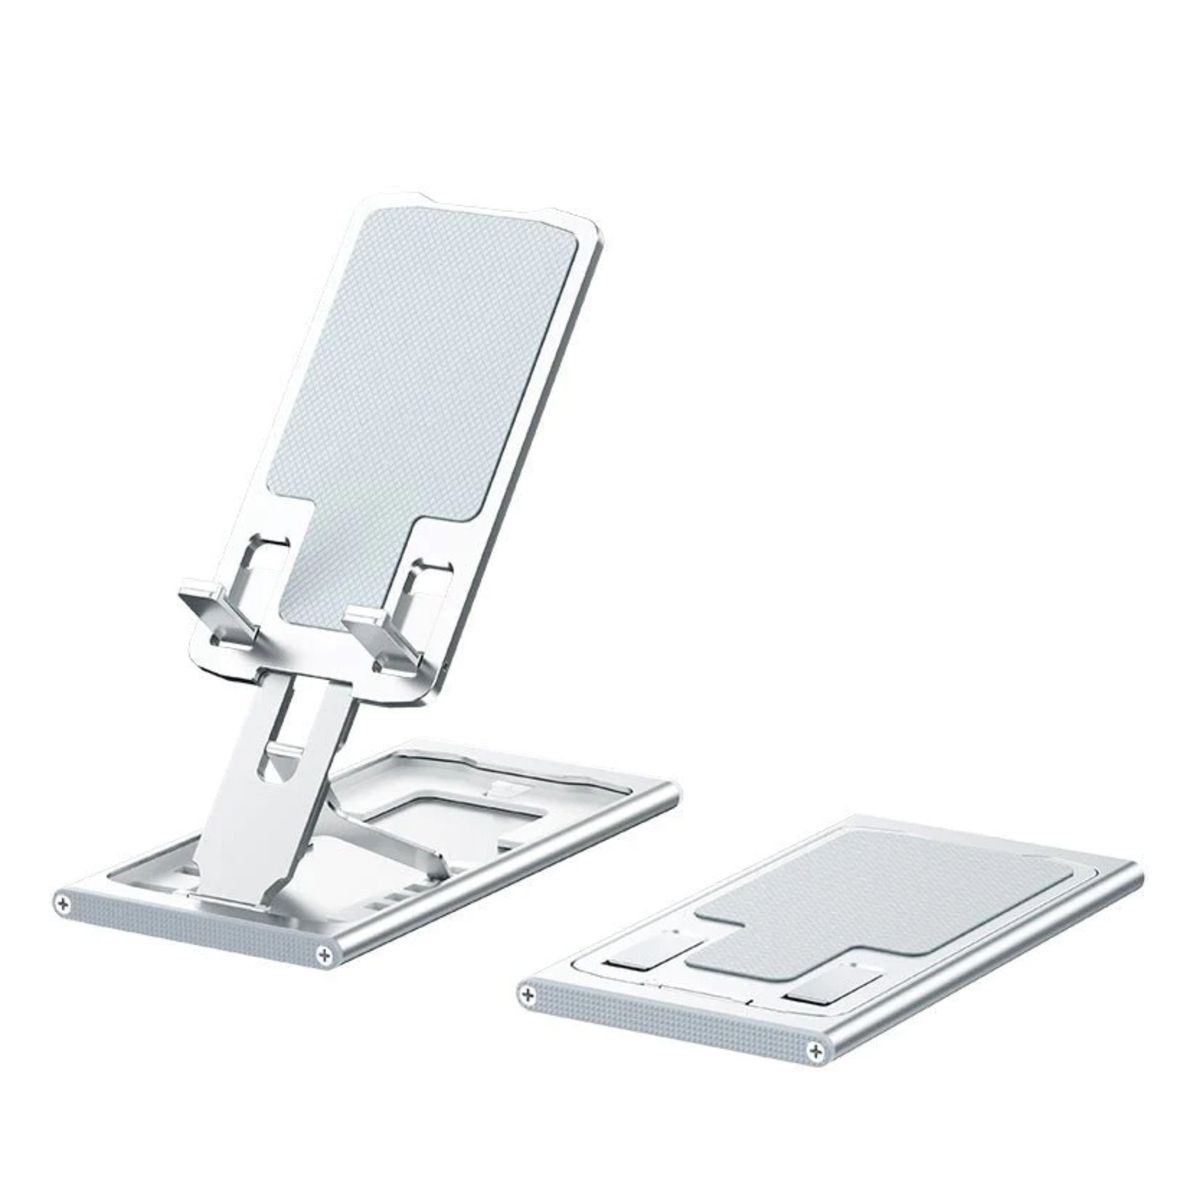 Photos - Holder / Stand Multitasky Slim & Compact Foldable Phone Holder by Multitasky™, MT-T-037 